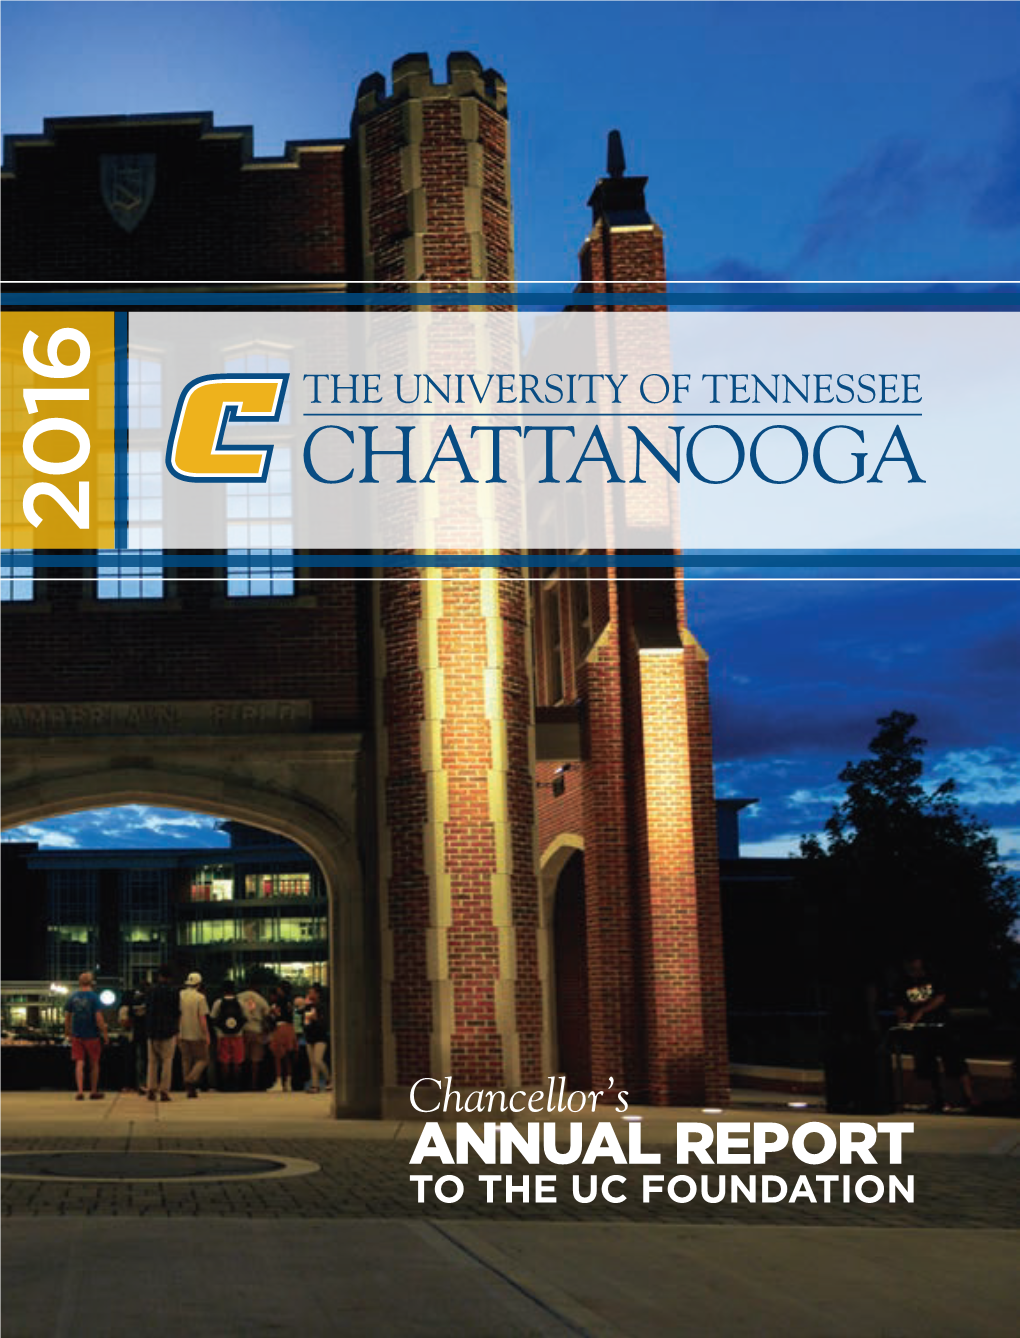 Annual Report to the Uc Foundation